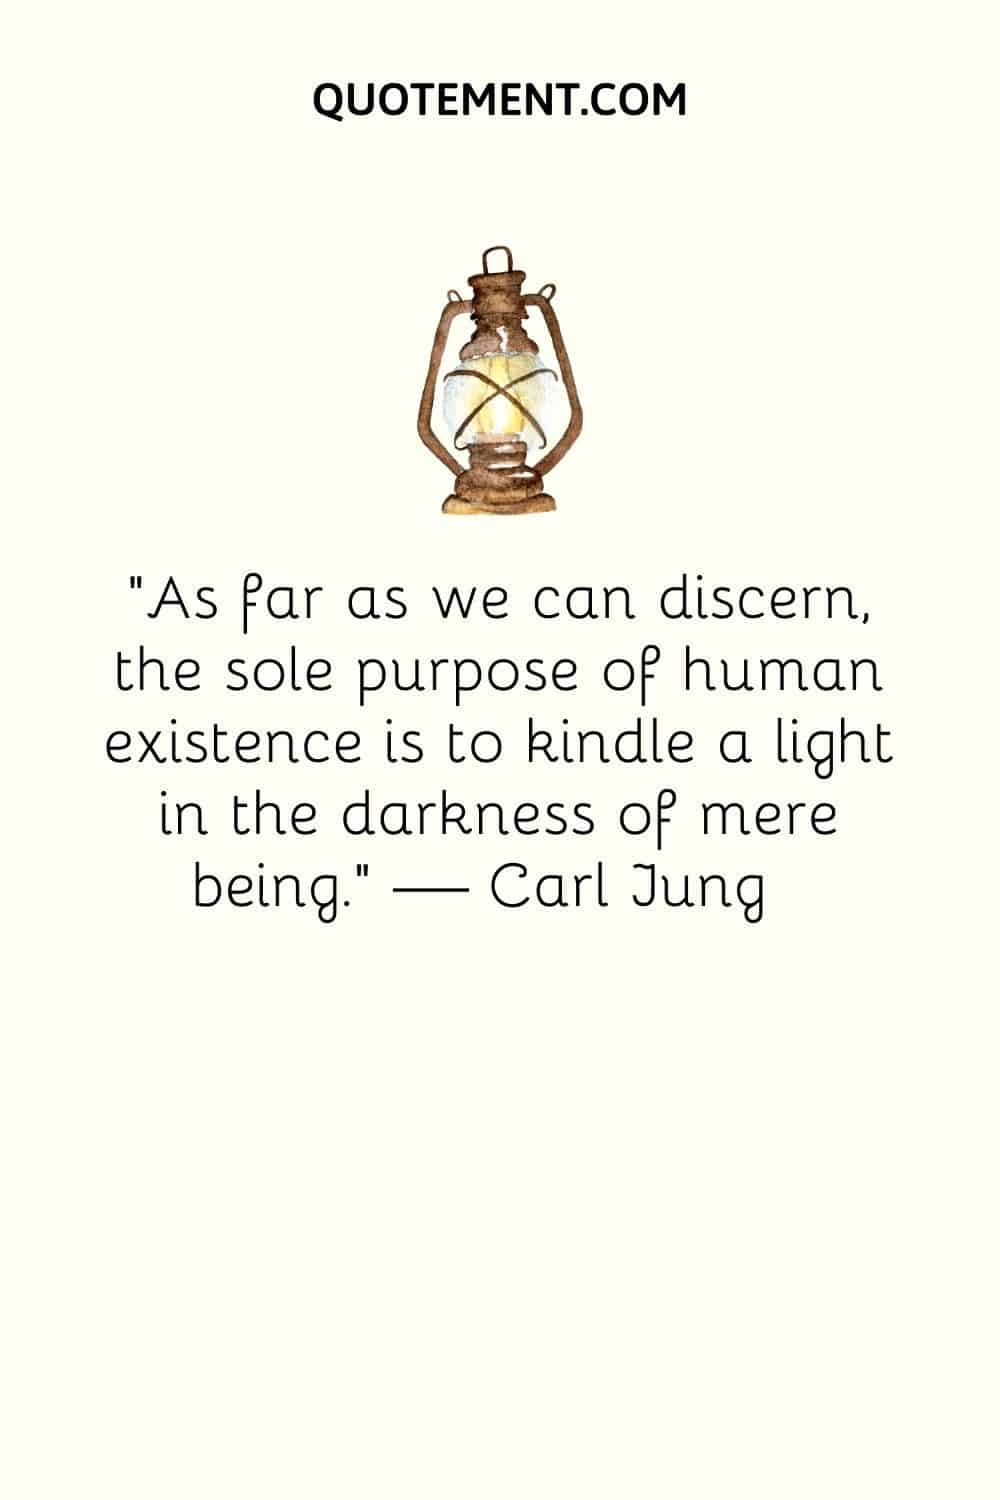 “As far as we can discern, the sole purpose of human existence is to kindle a light in the darkness of mere being.” — Carl Jung